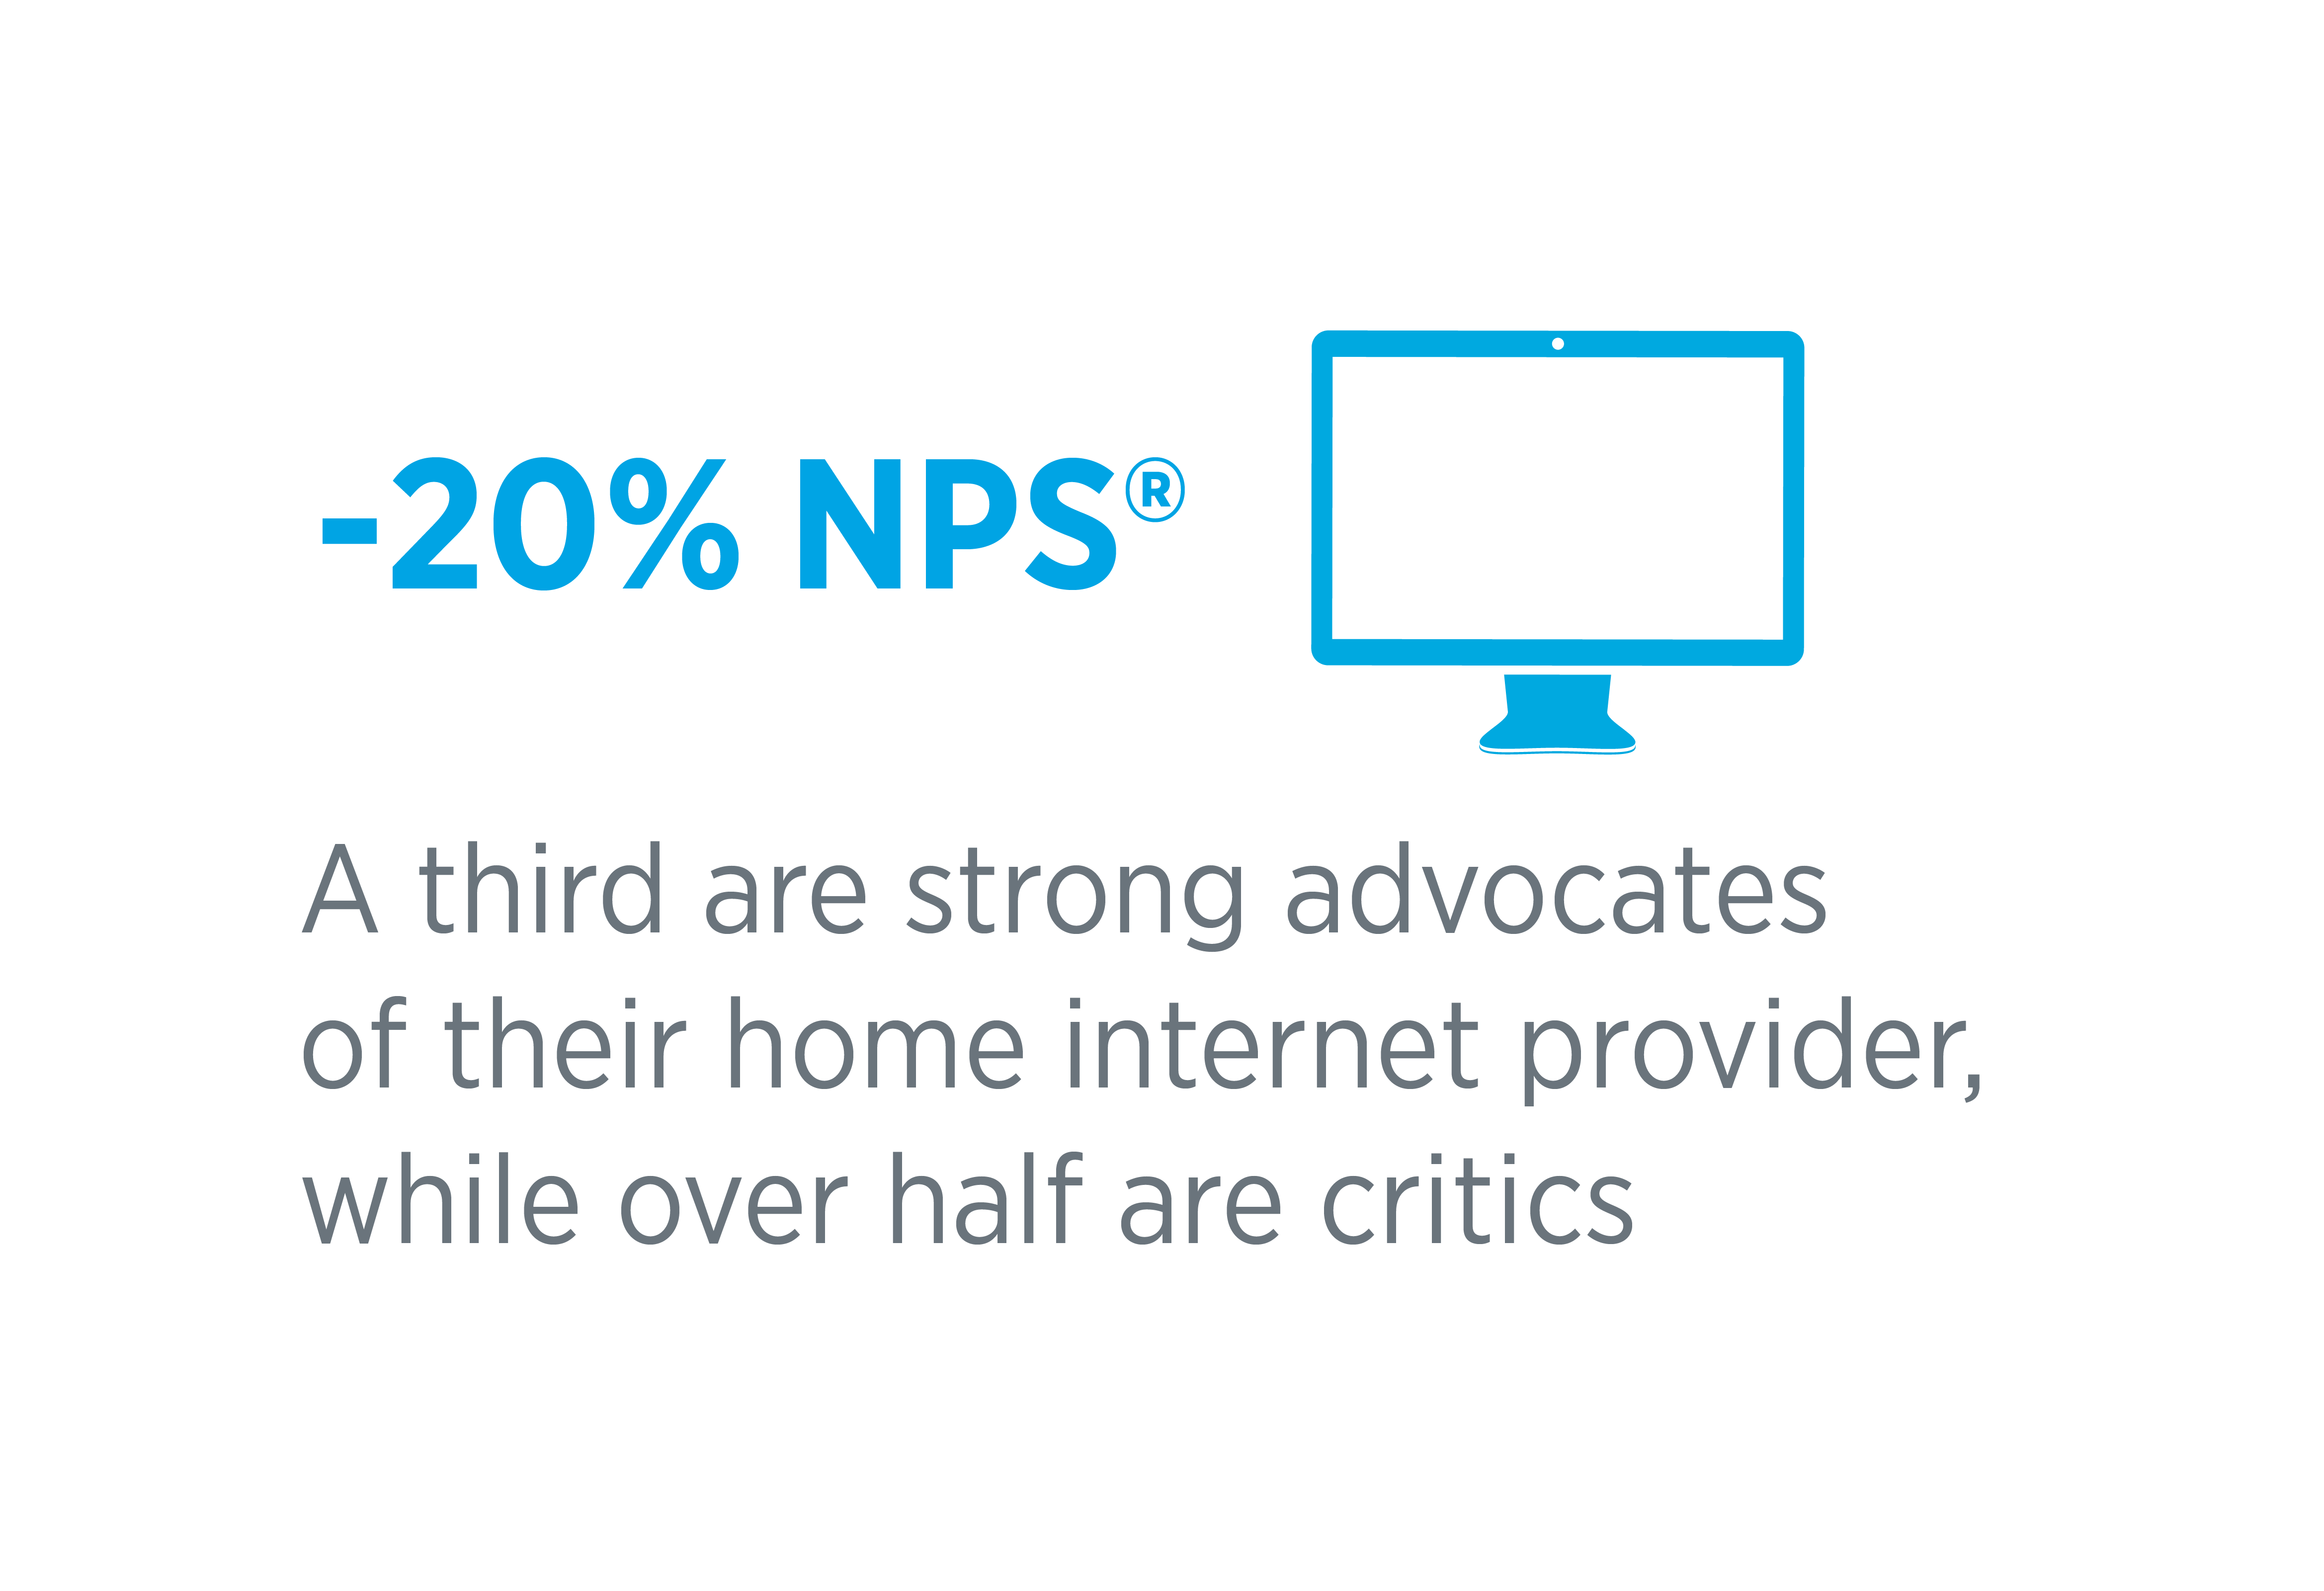 a third are strong advocates of their home internet provider, while over half are critics